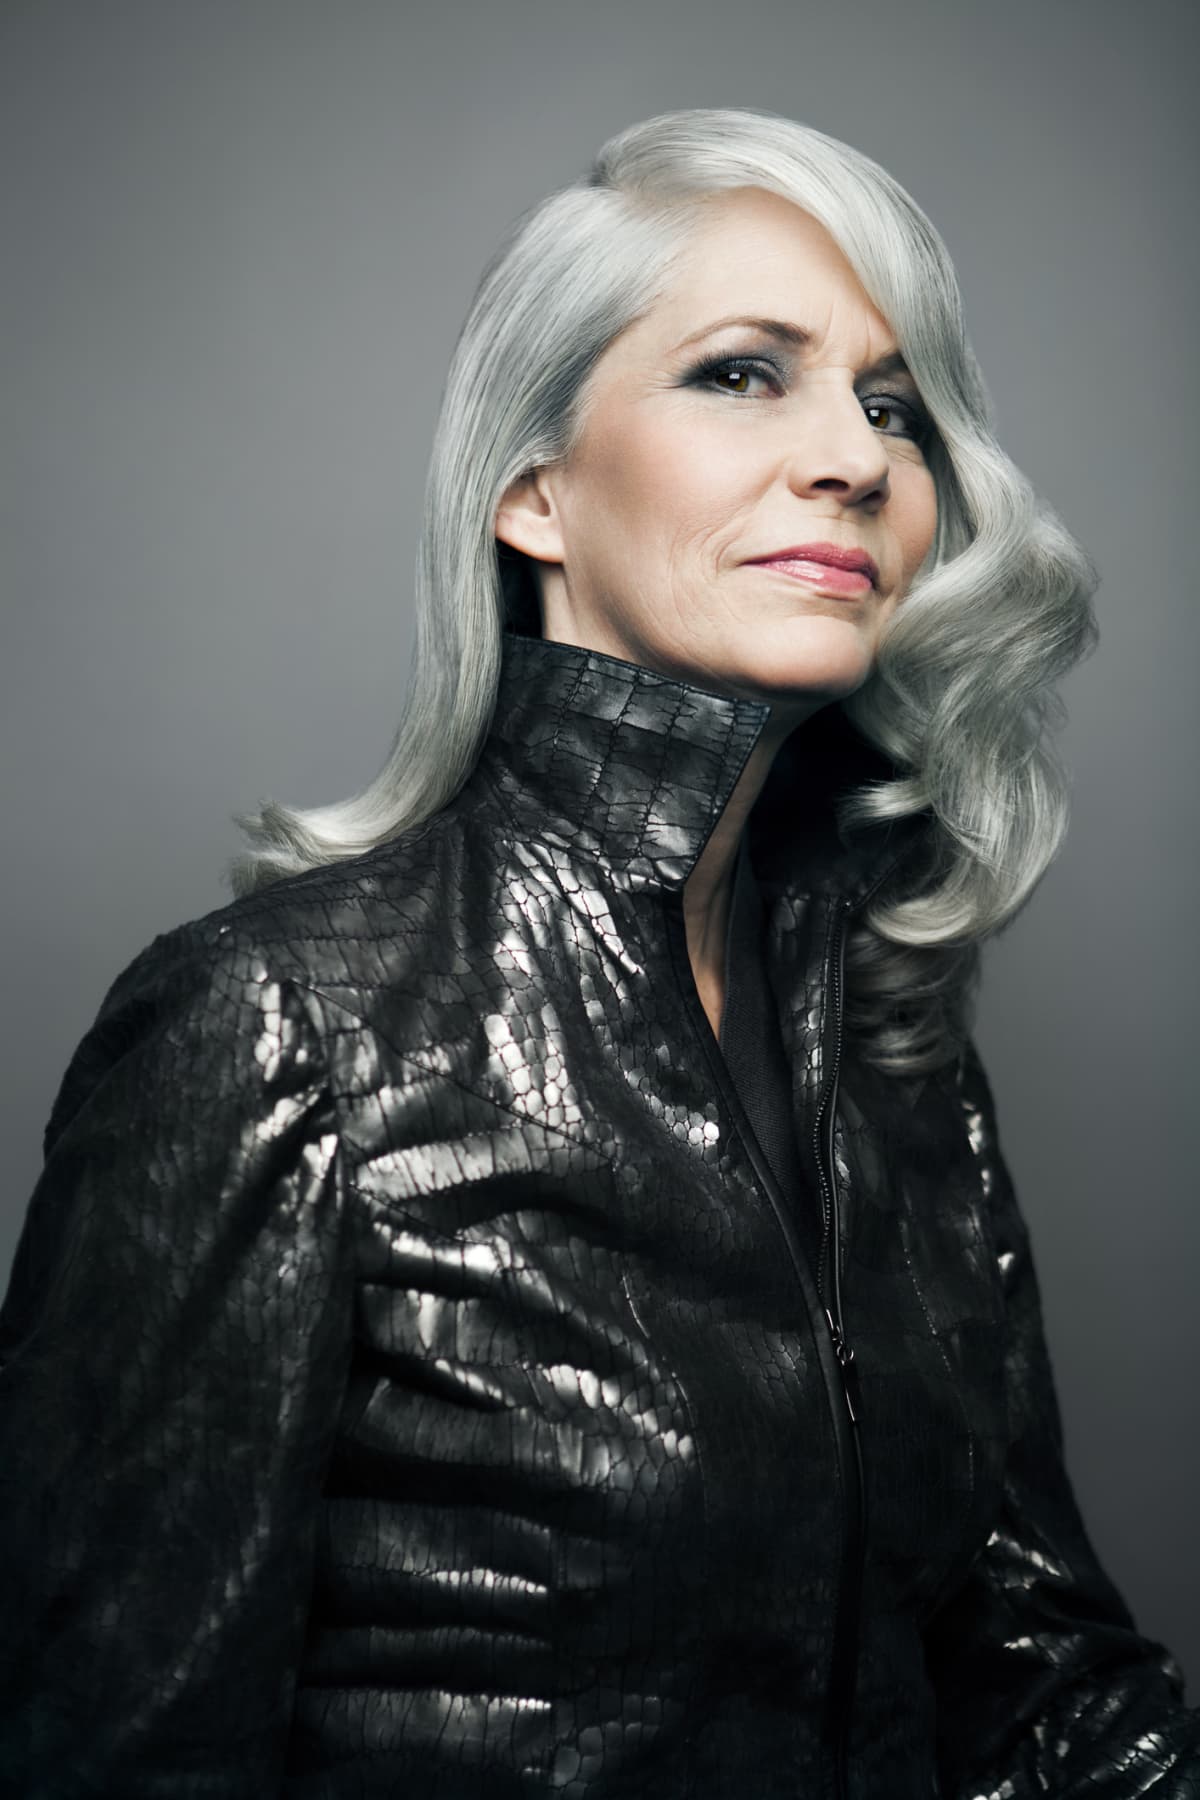 Mature woman with long, silvery, grey hair wearing a black leather jacket in front of a grey background